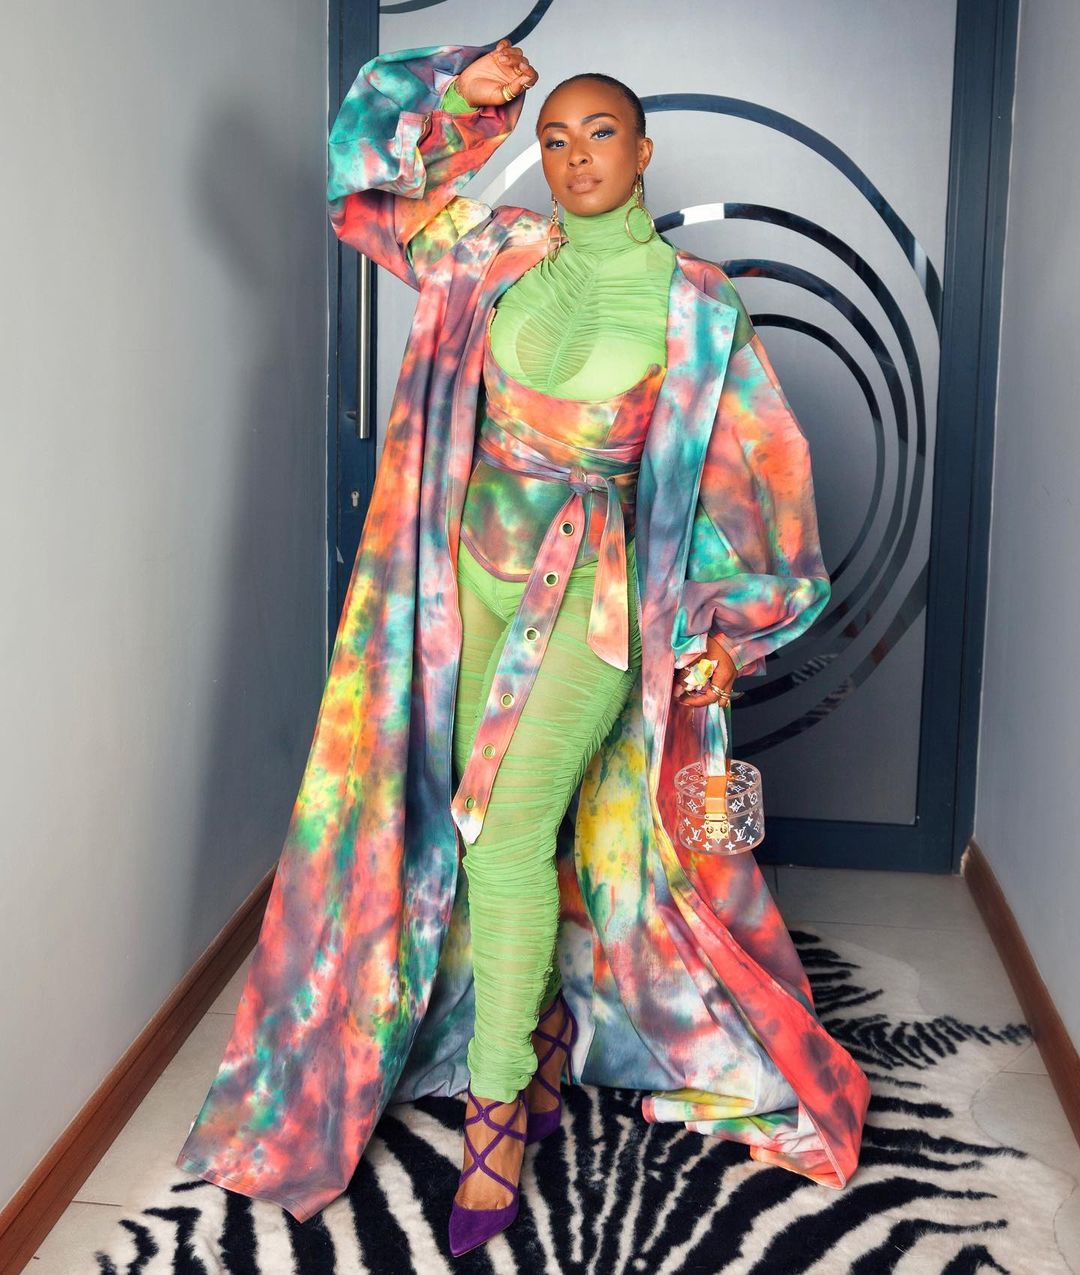 Boity Thulo Rocks The Perfect Style For An Event